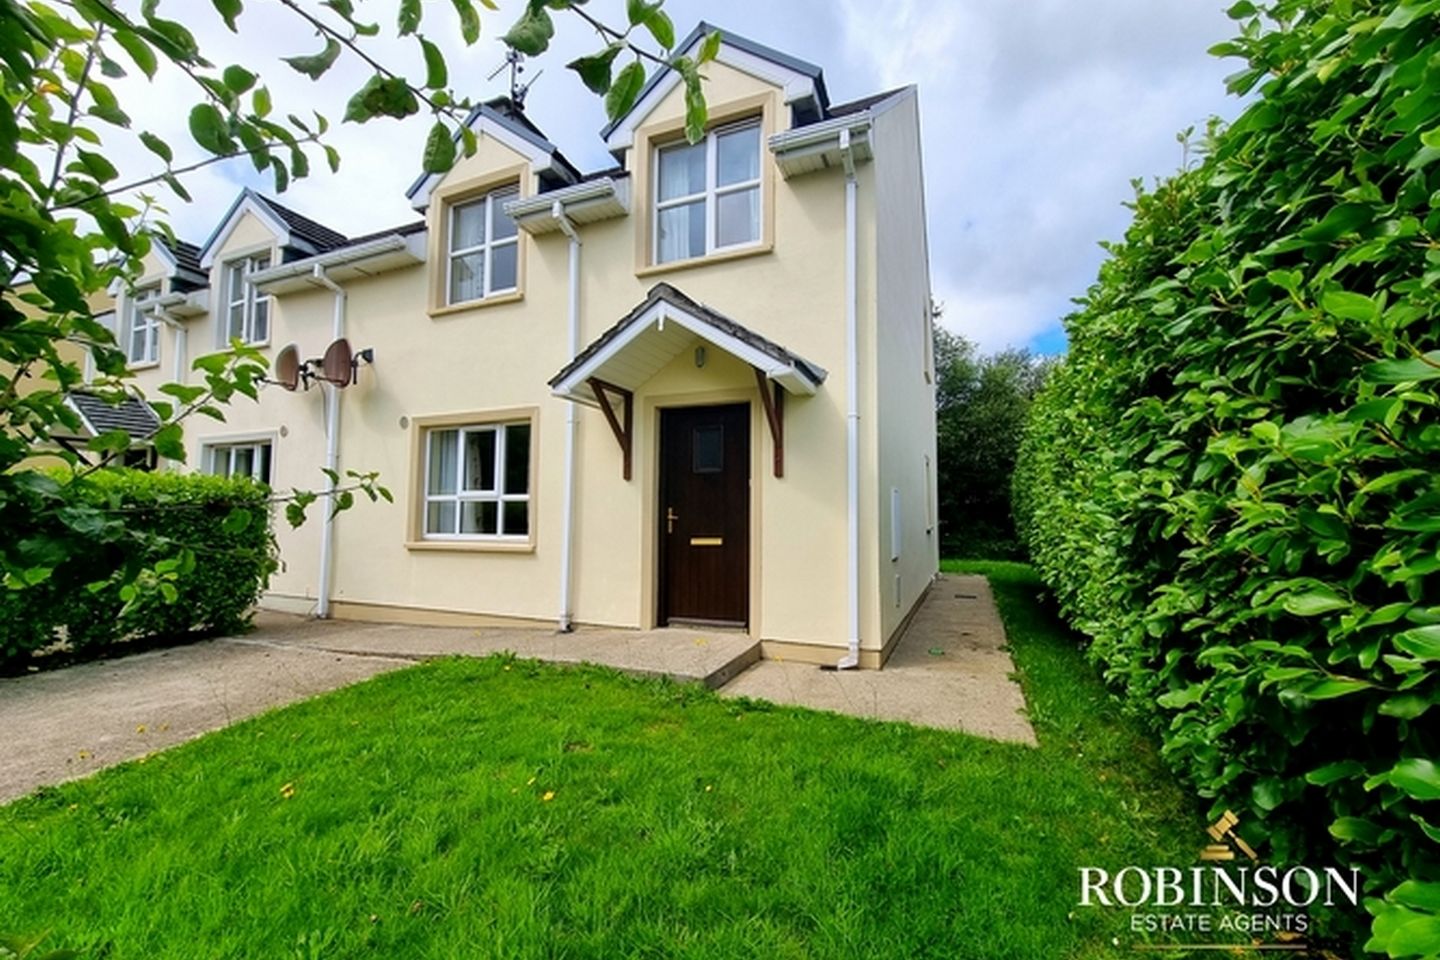 10 Birch Hill Upper, Creeslough, Co. Donegal